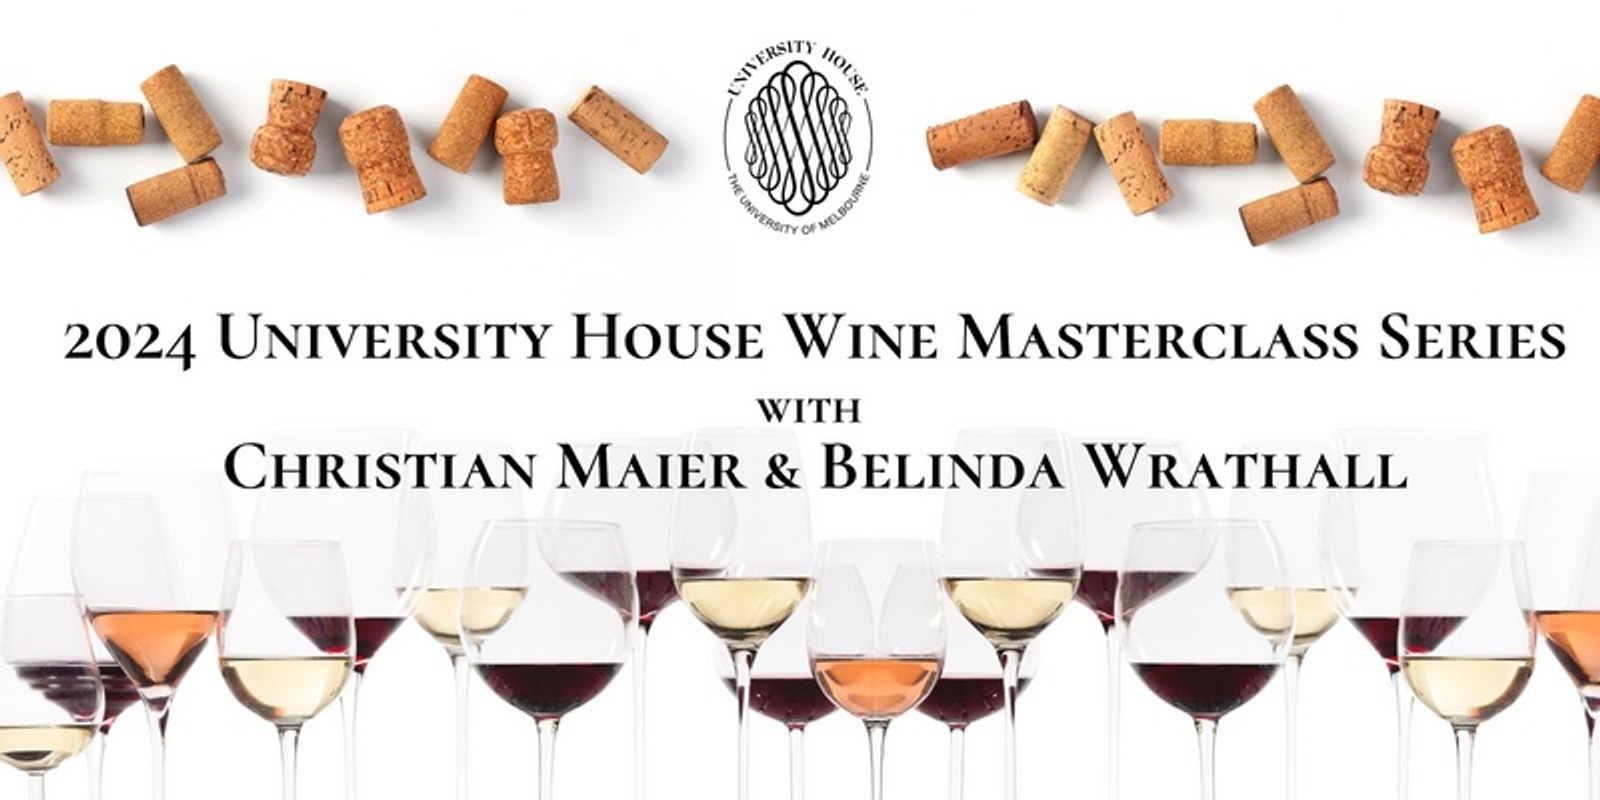 Banner image for 2024 University House Wine Masterclass Series with Christian Maier & Belinda Wrathall